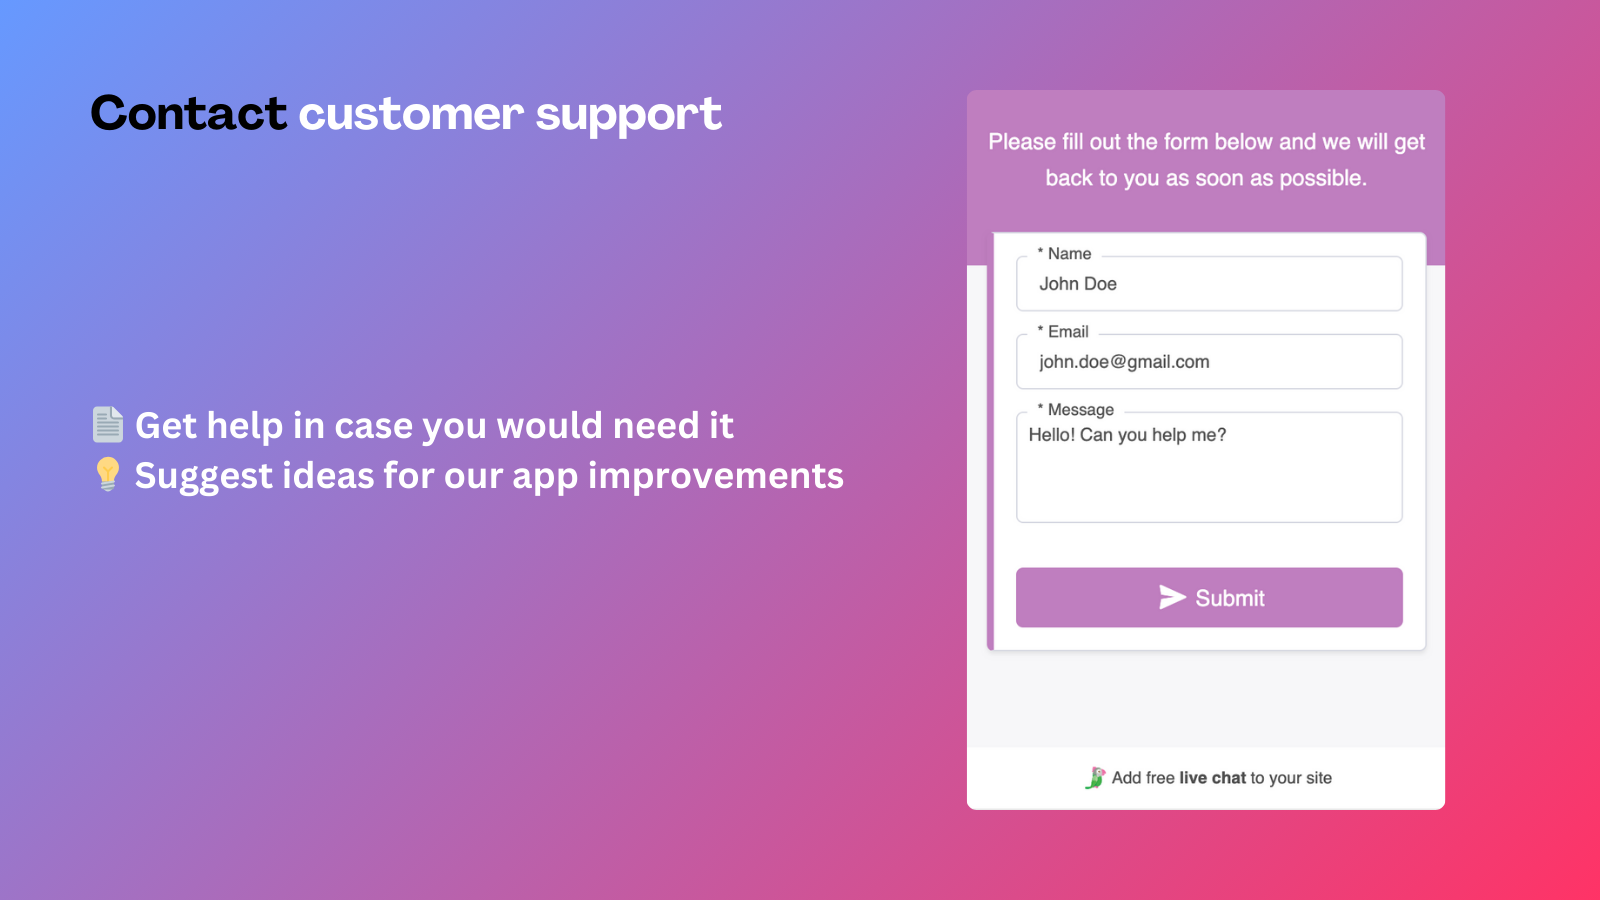 Contact customer support. Get guidance. Suggest us ideas